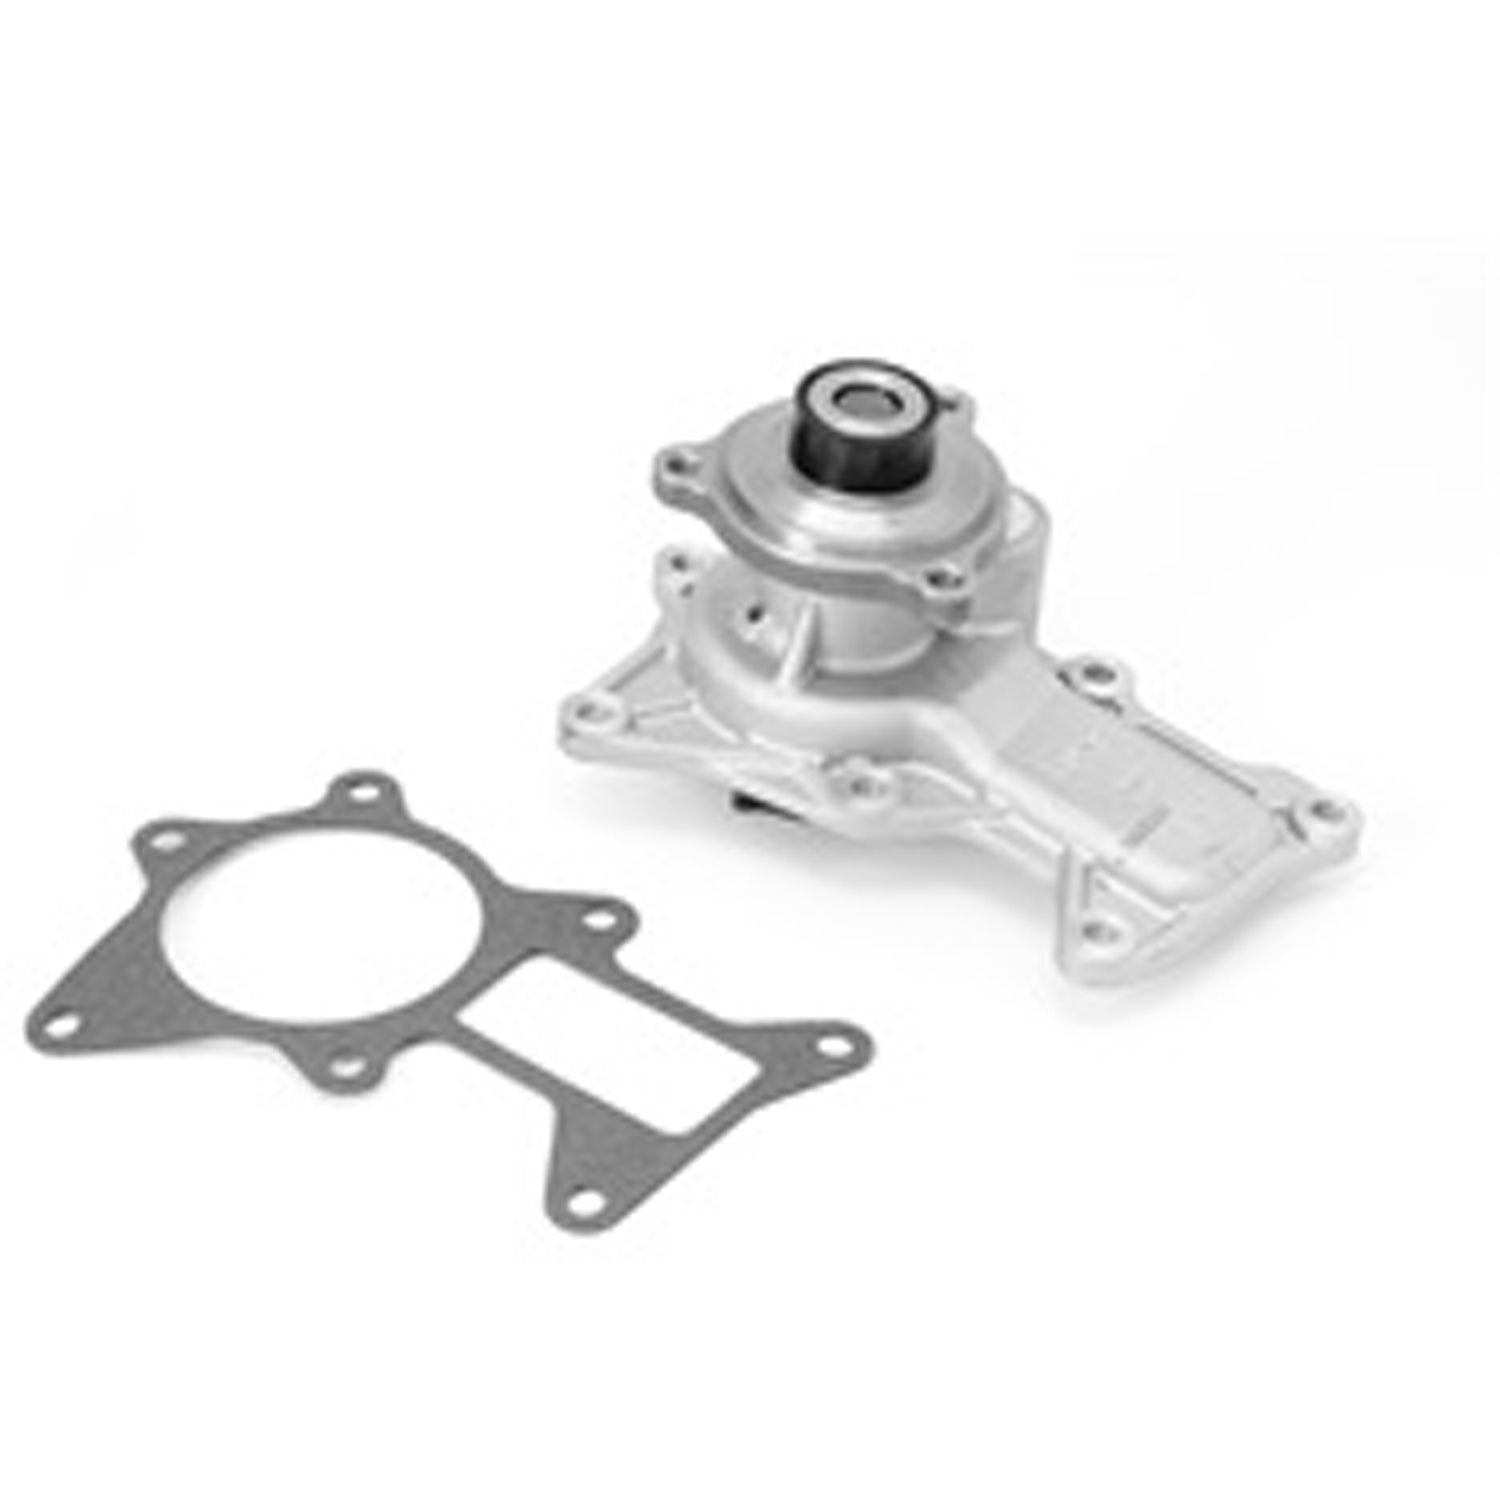 Replacement water pump from Omix-ADA, Fits 07-11 Jeep Wrangler JK with 3.8 liter gas engine